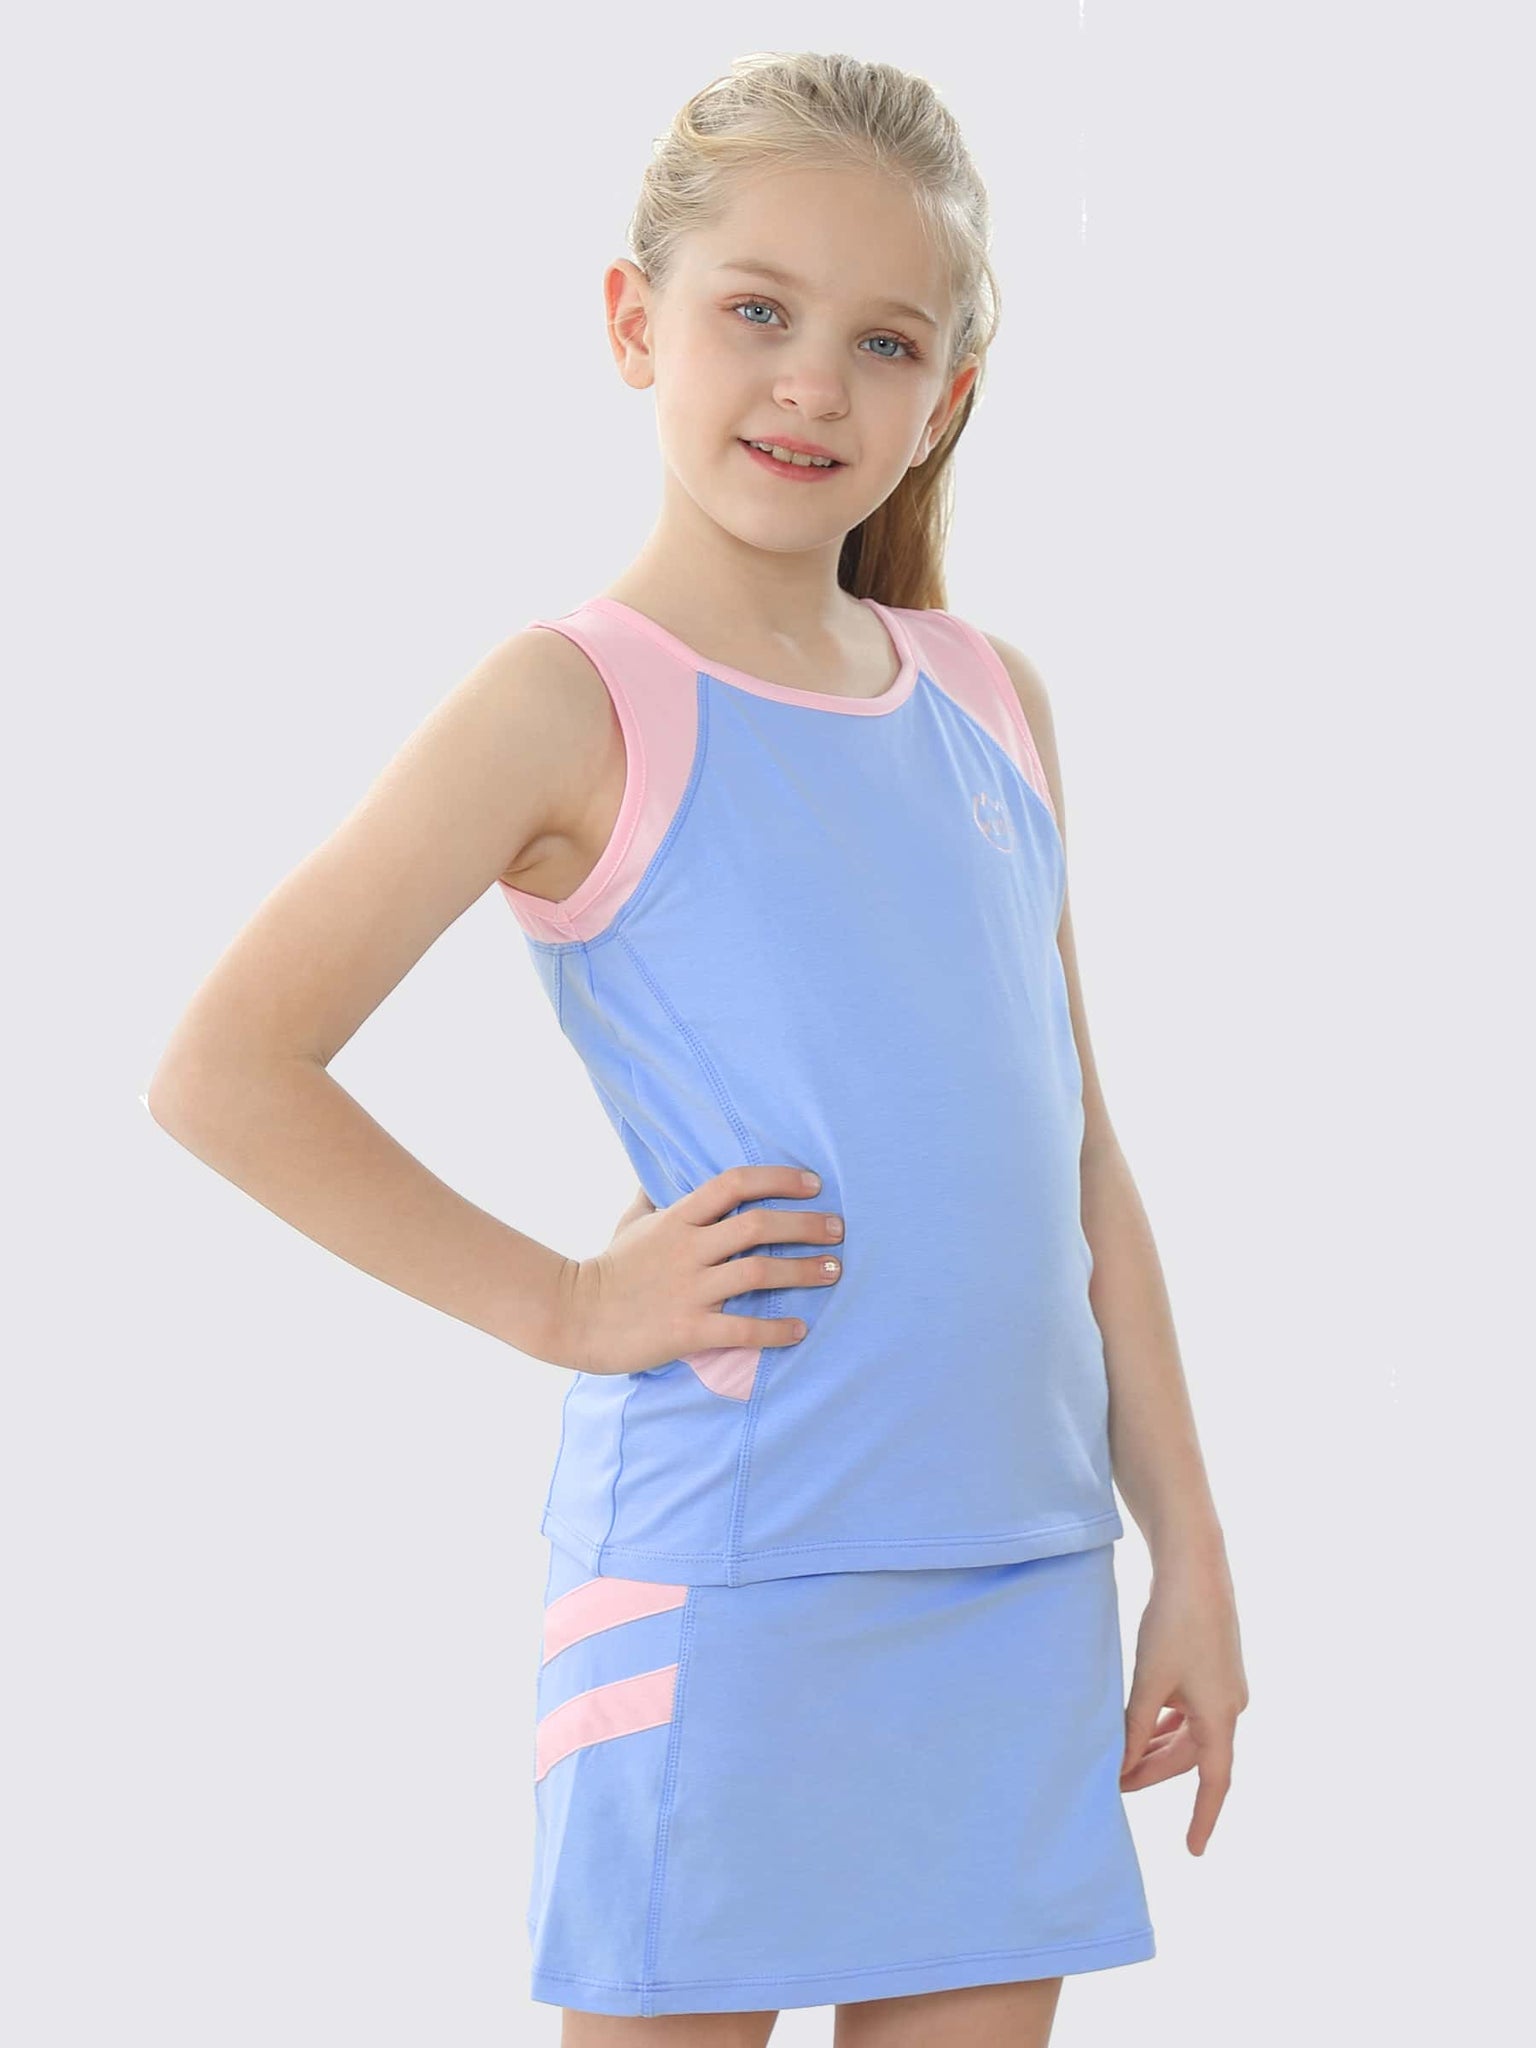 Willit Girls' Tennis Outfit_Blue_model3